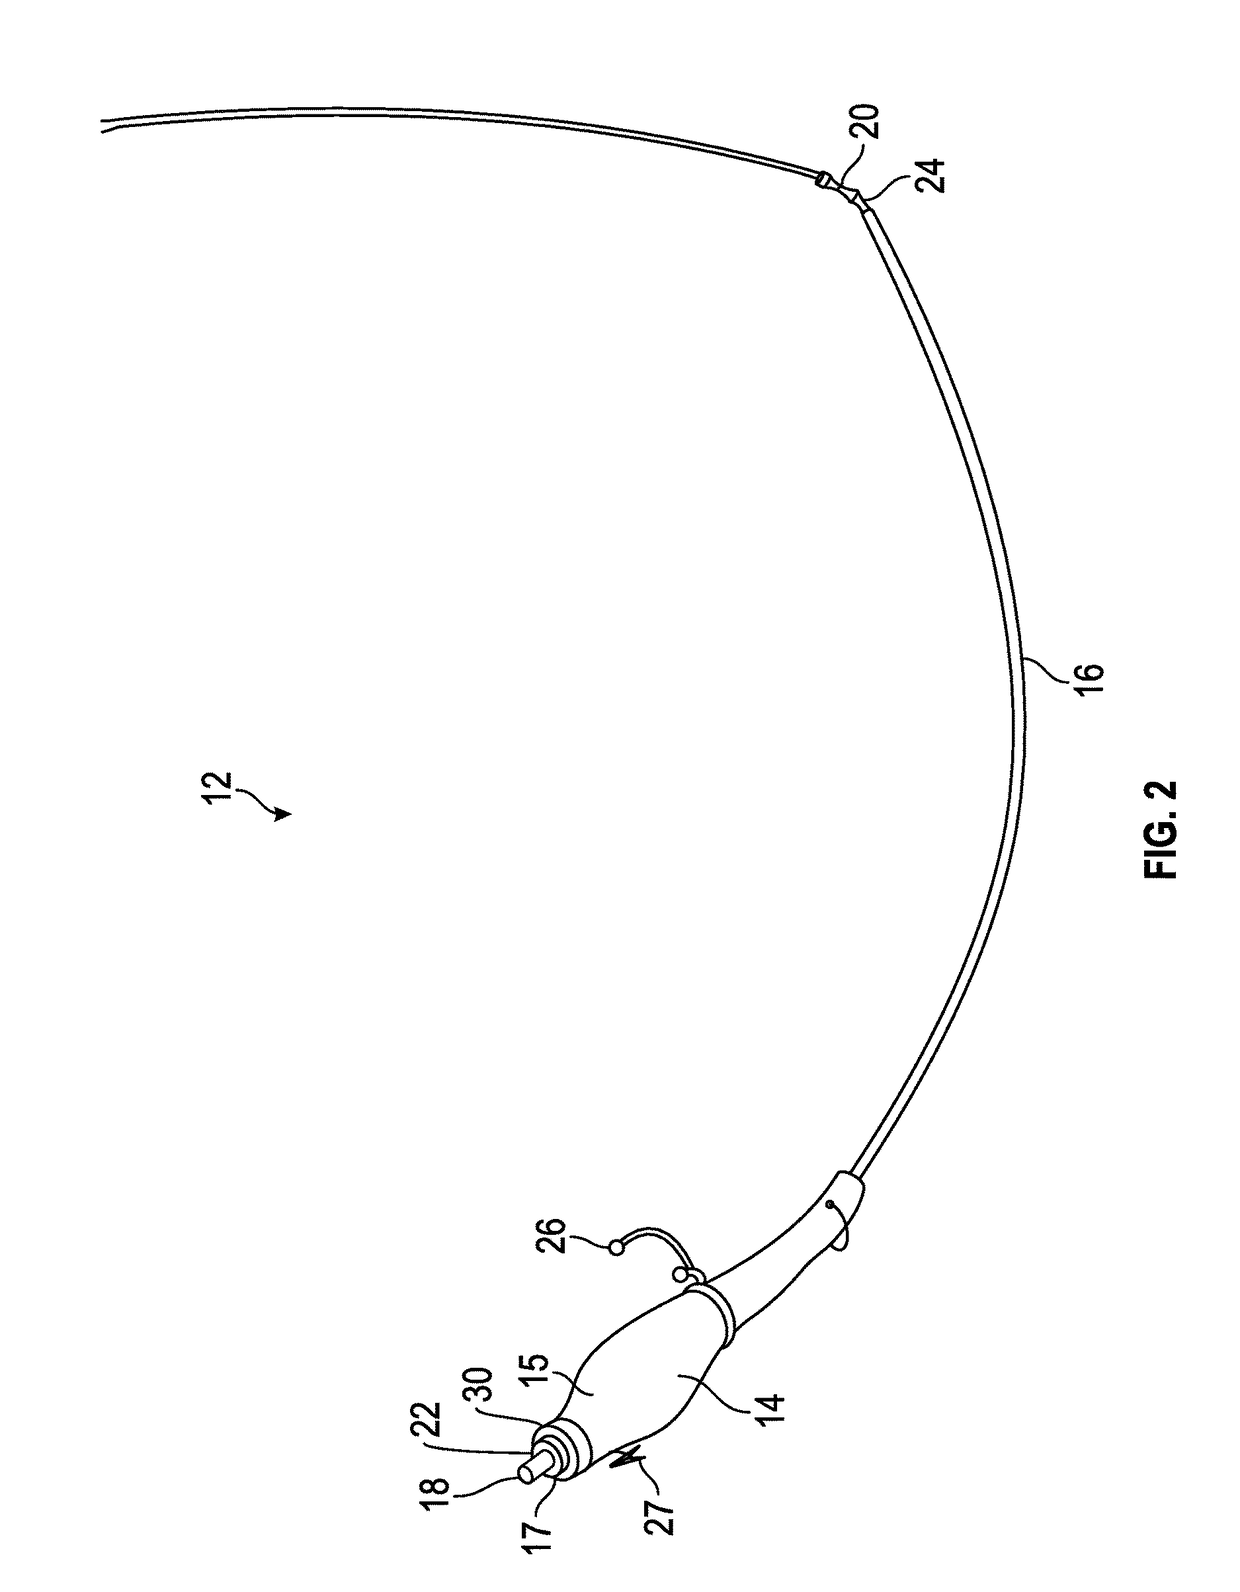 Scent dispensing system and apparatus